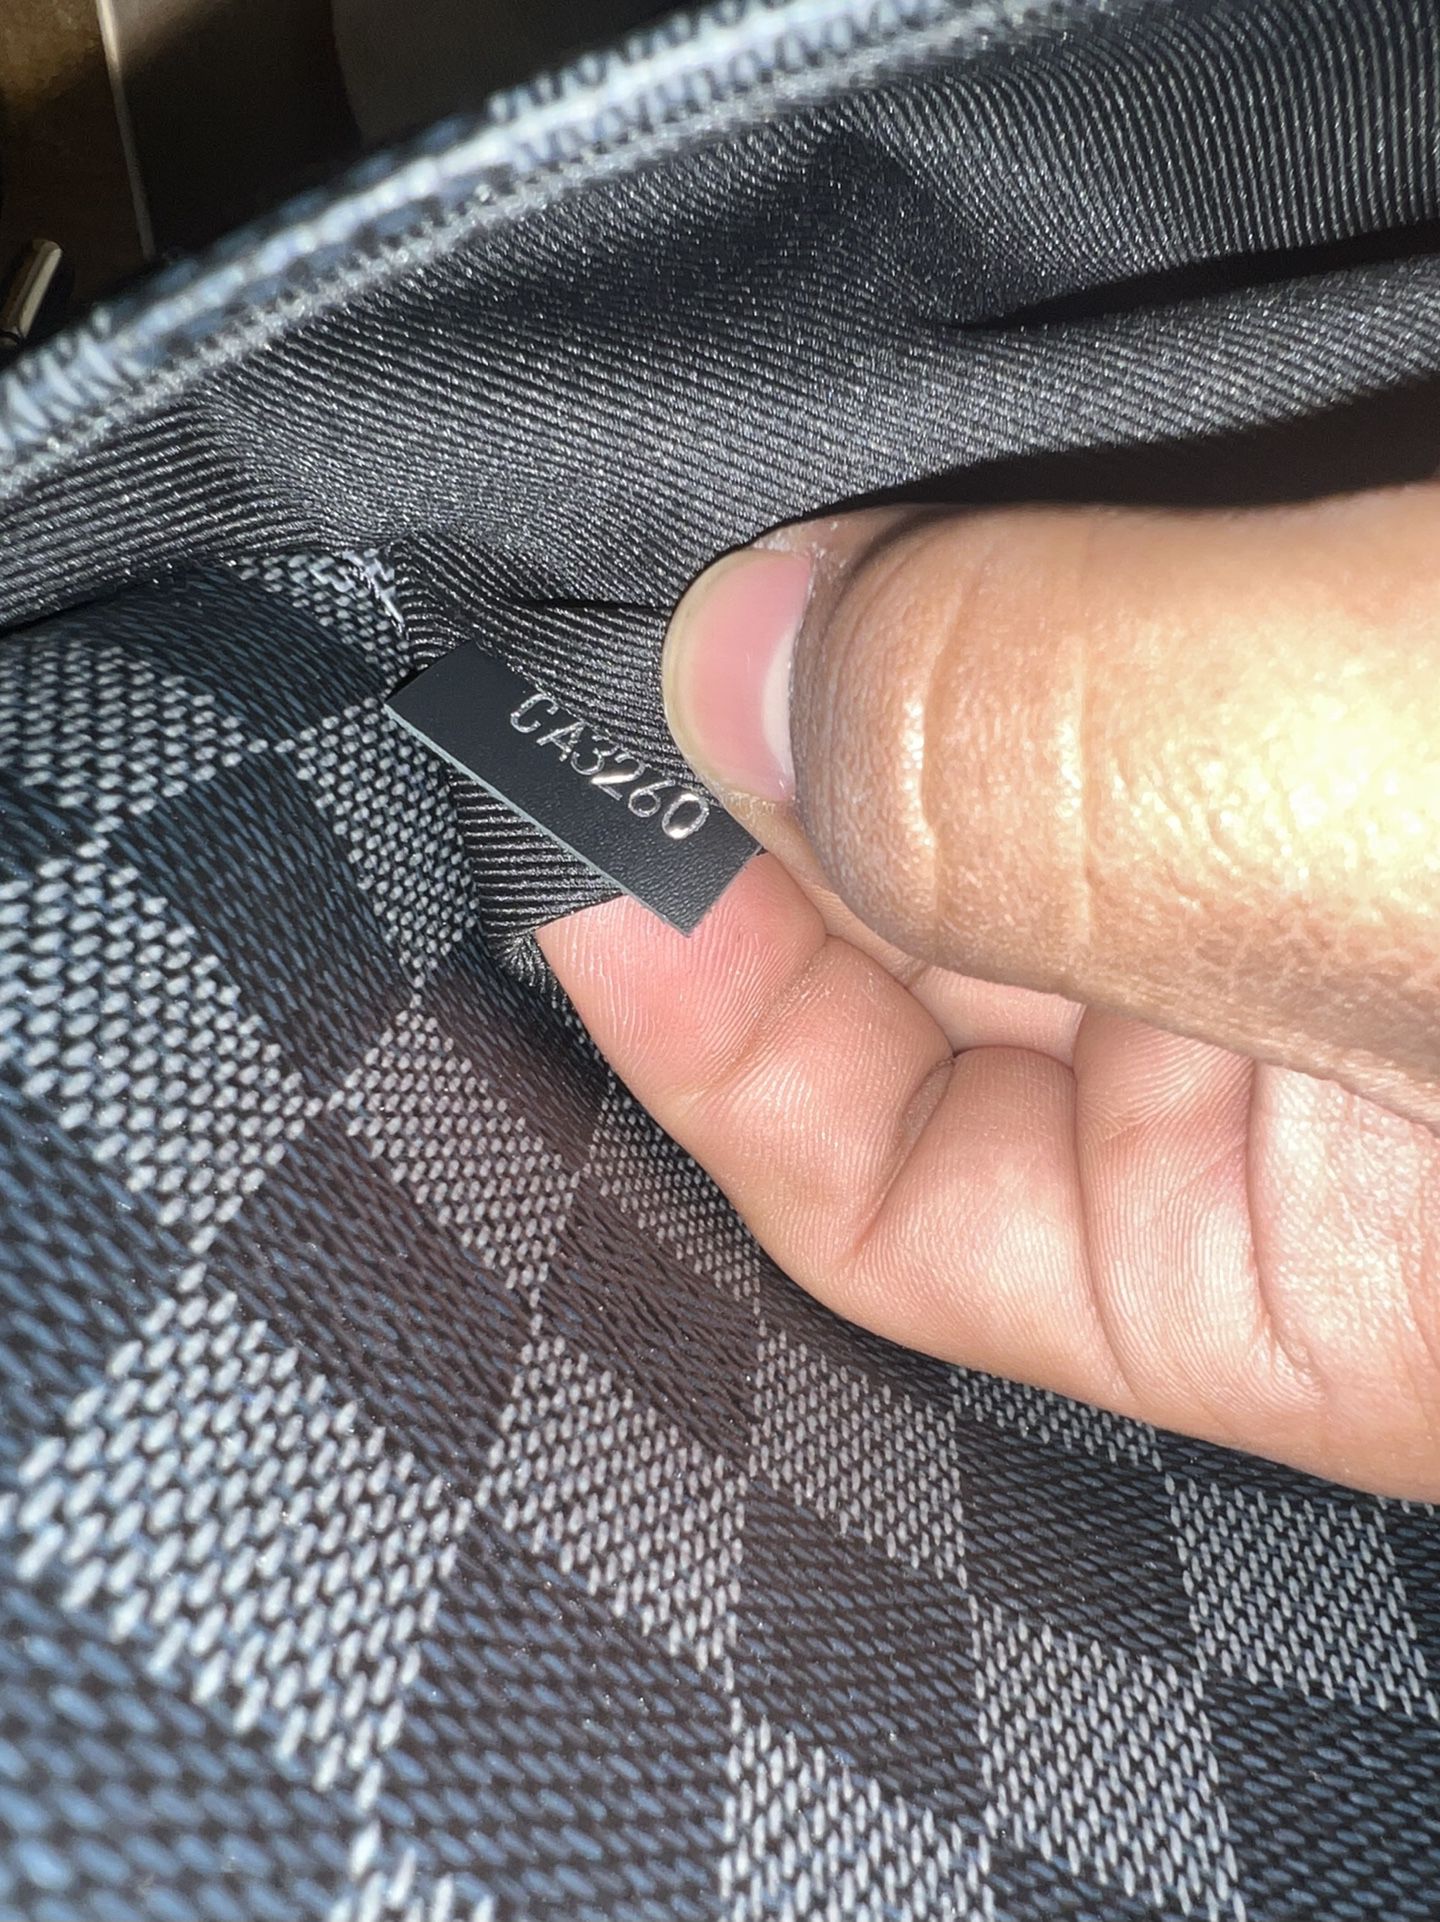 Louis Vuitton messenger bag for Sale in Lochearn, MD - OfferUp